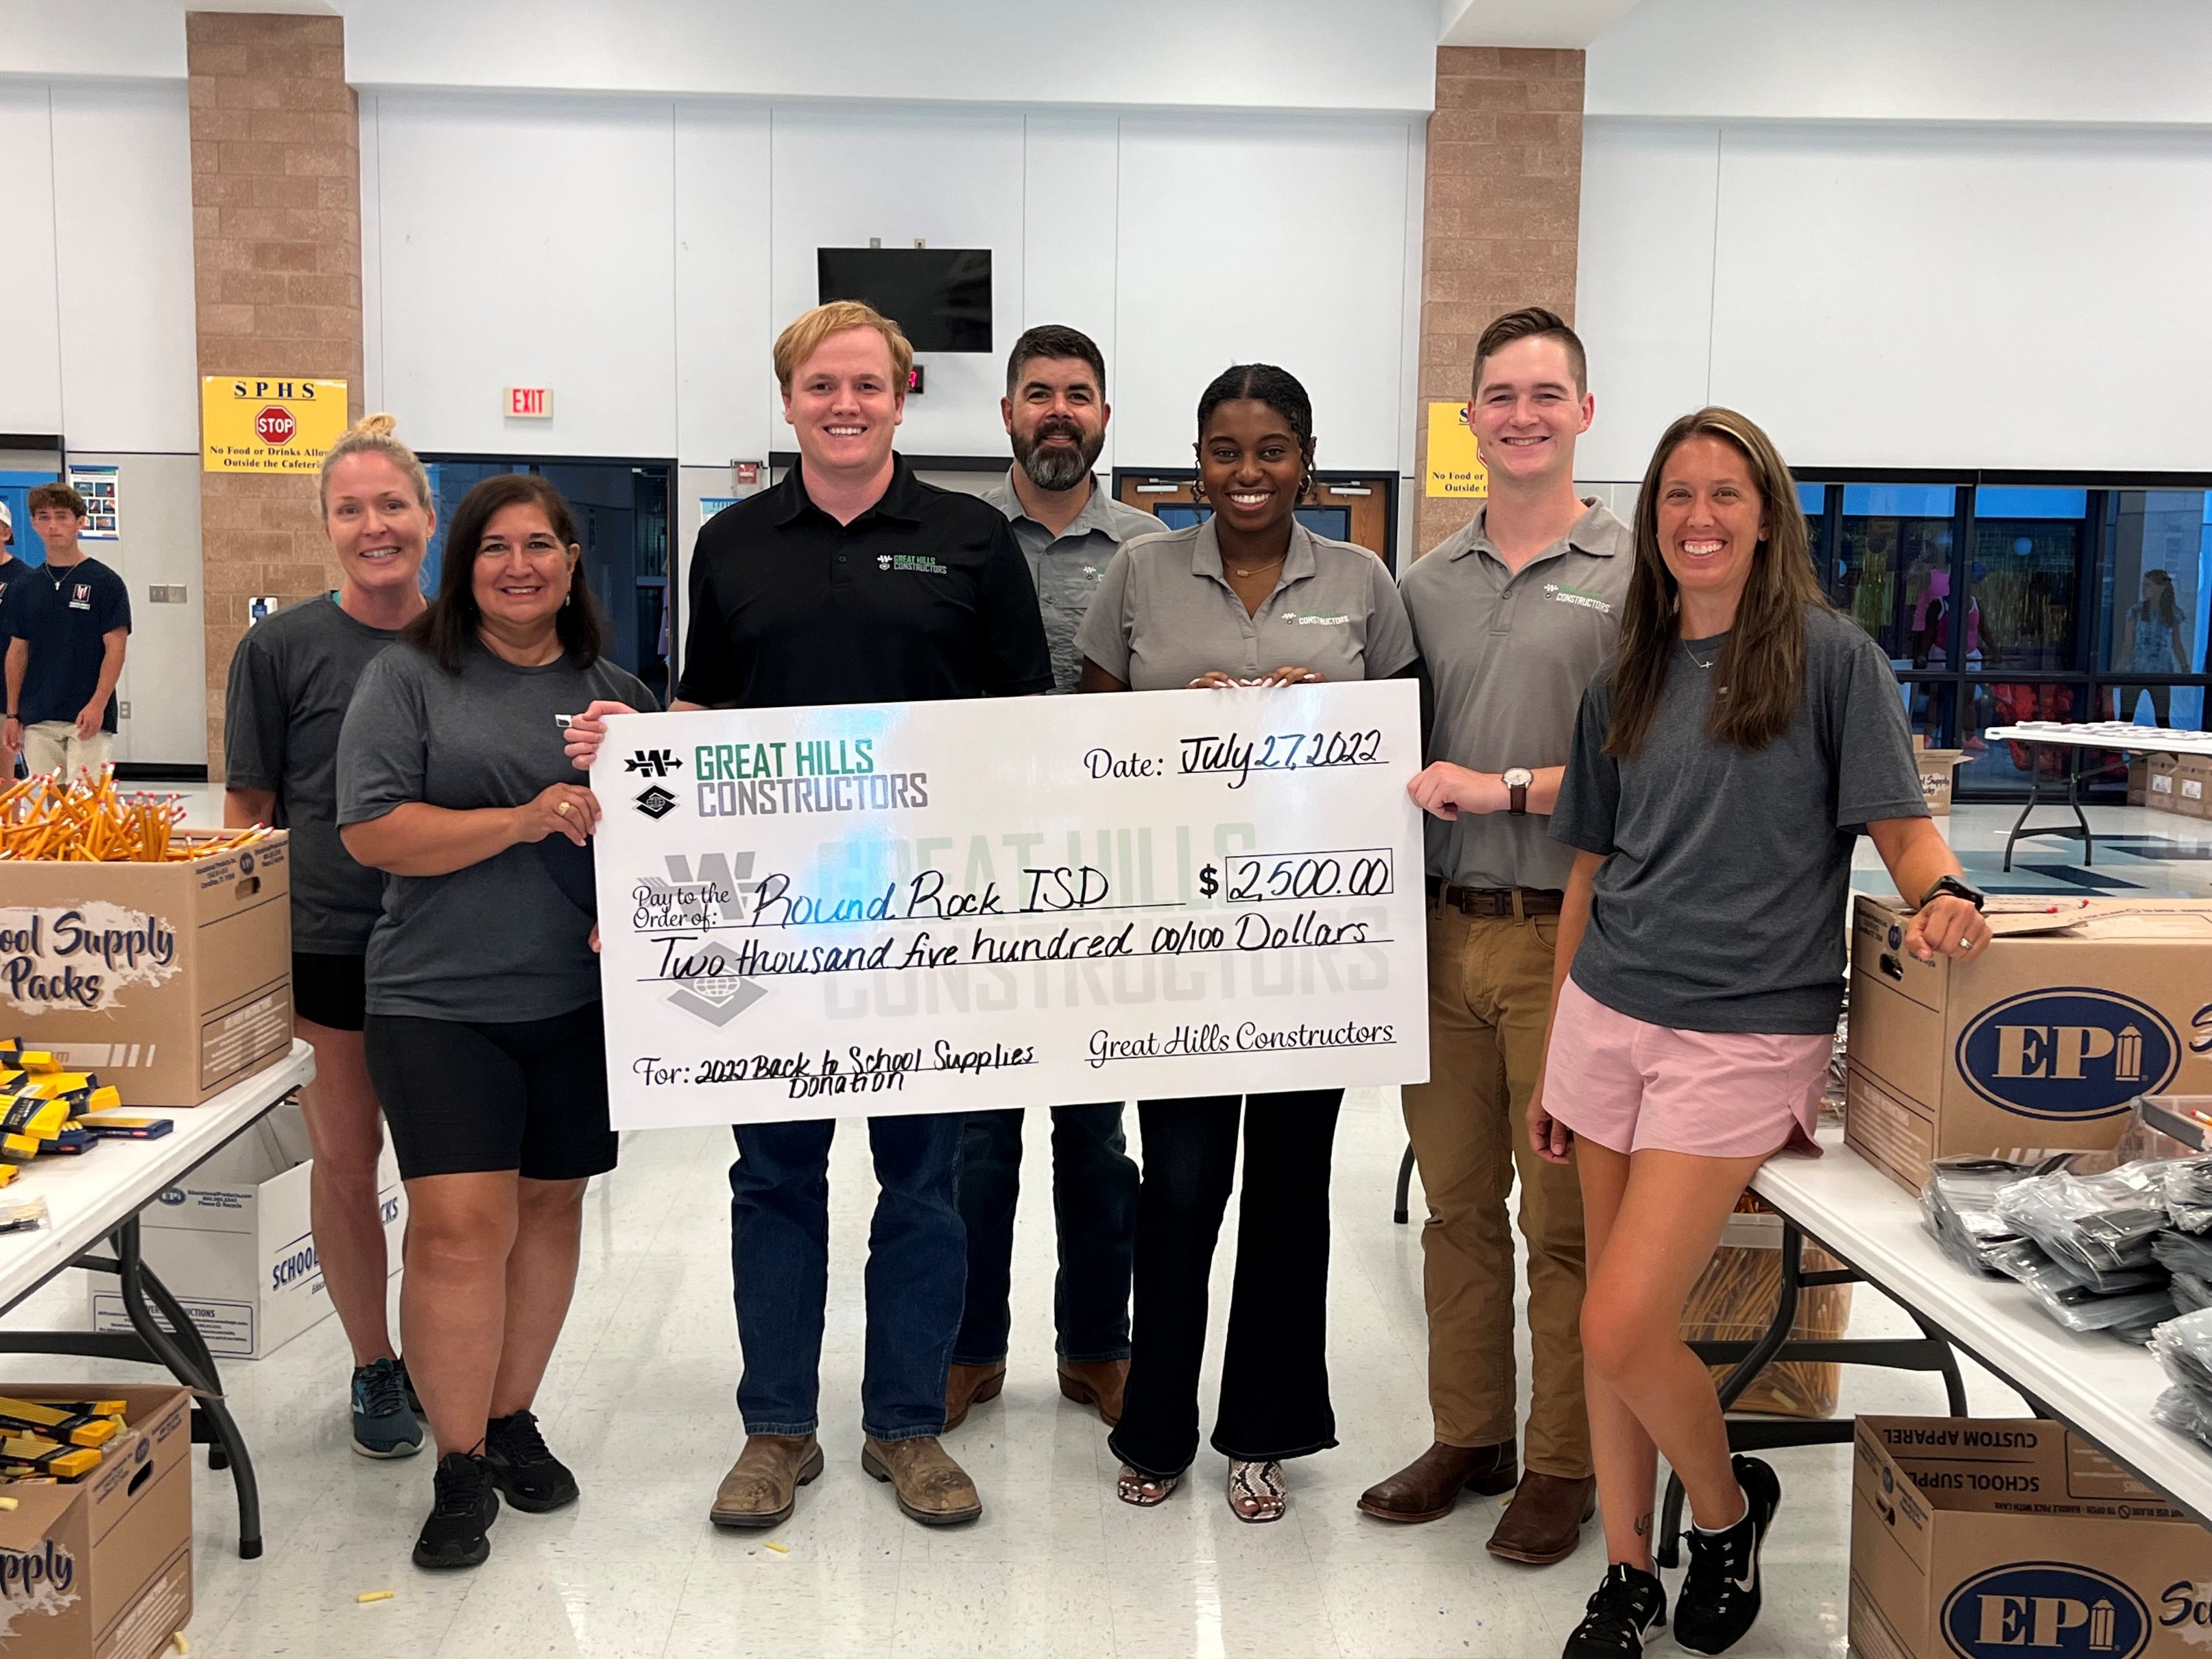 The Great Hills Constructors team stands with a large novelty check for $2,500 made out to Round Rock ISD for Back to School Supplies.